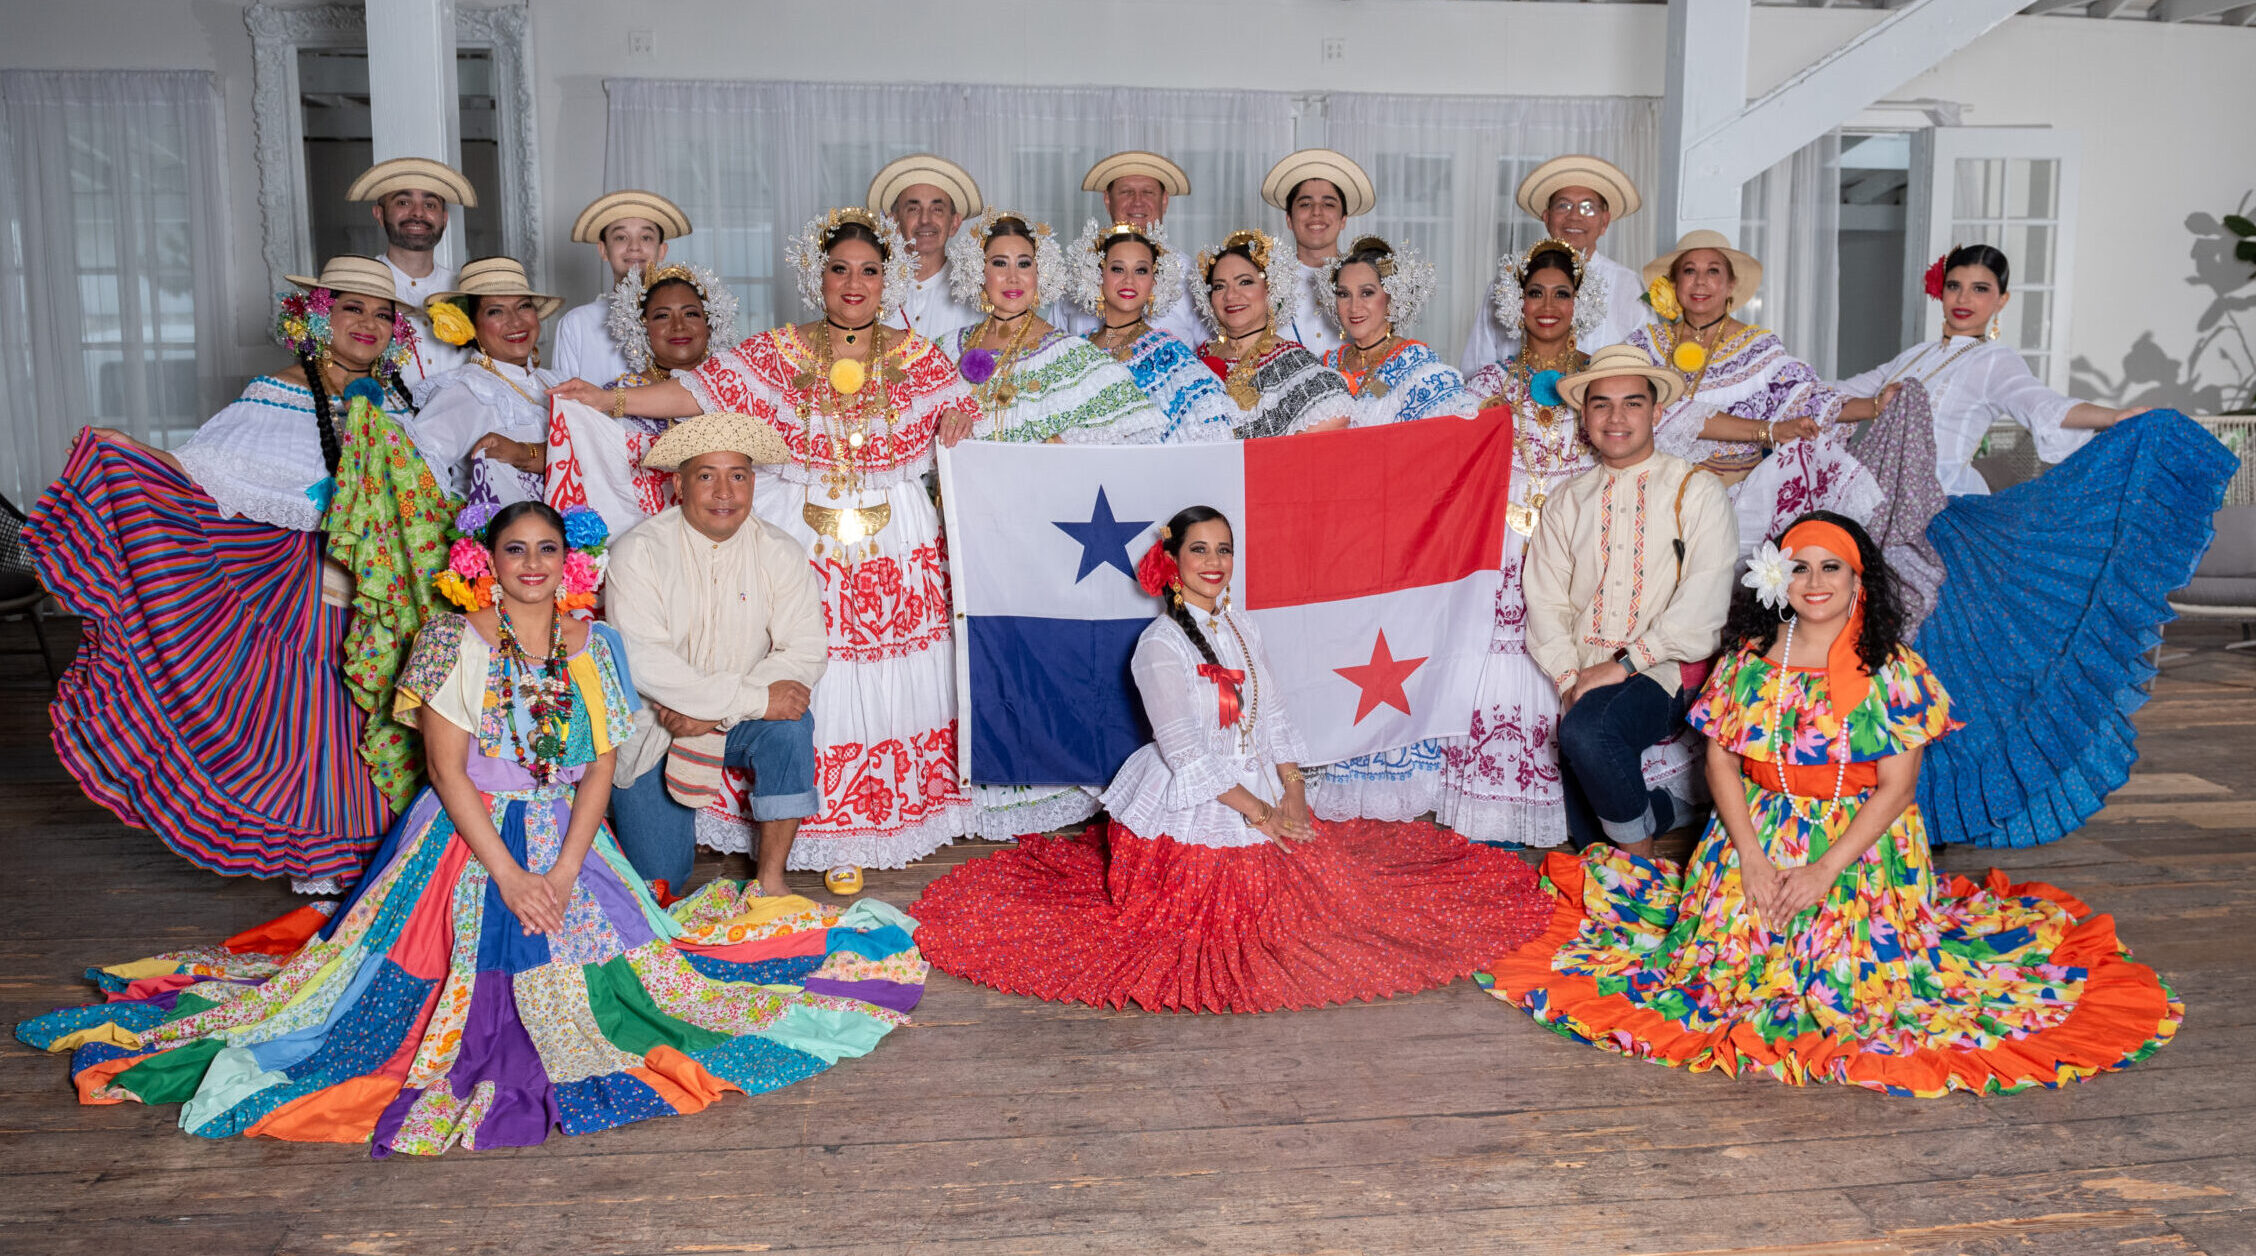 The full dance ensemble poses for a photo in a variety of costumes. Members in the front row hold up the Panamanian flag.